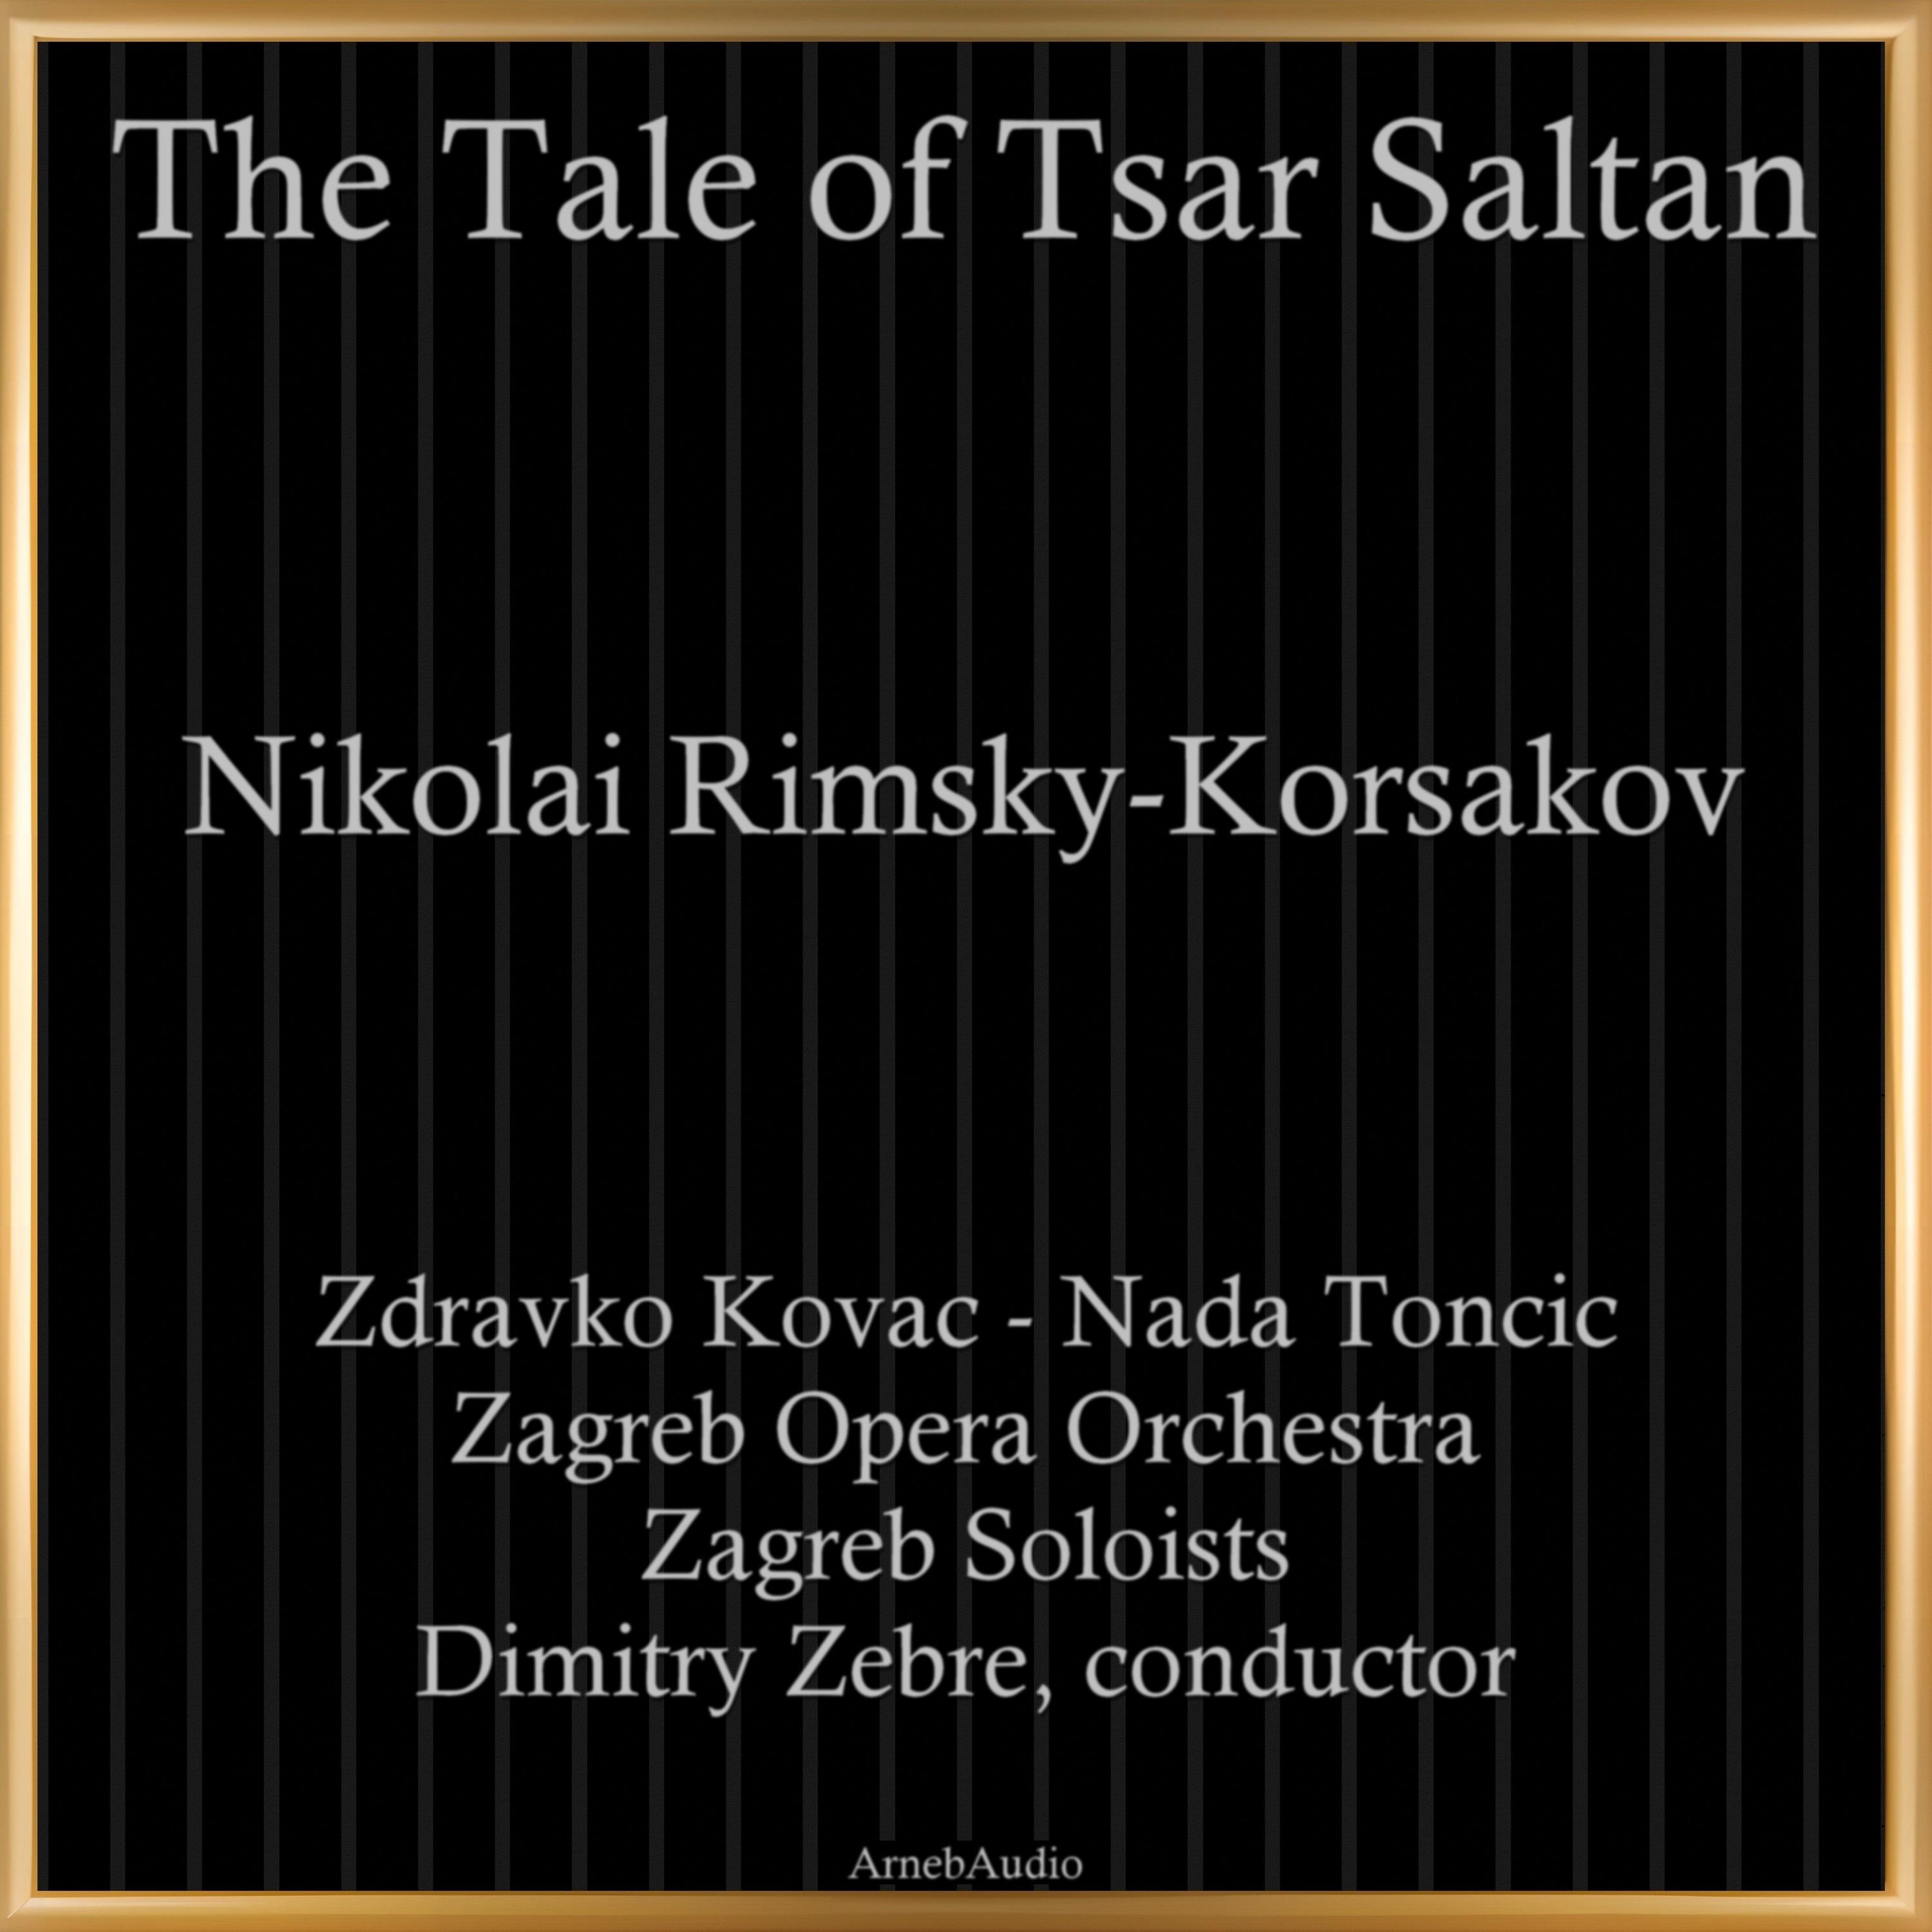 Zagreb Opera Orchestra - The Tale of Tsar Saltan, INR 79, Act I: